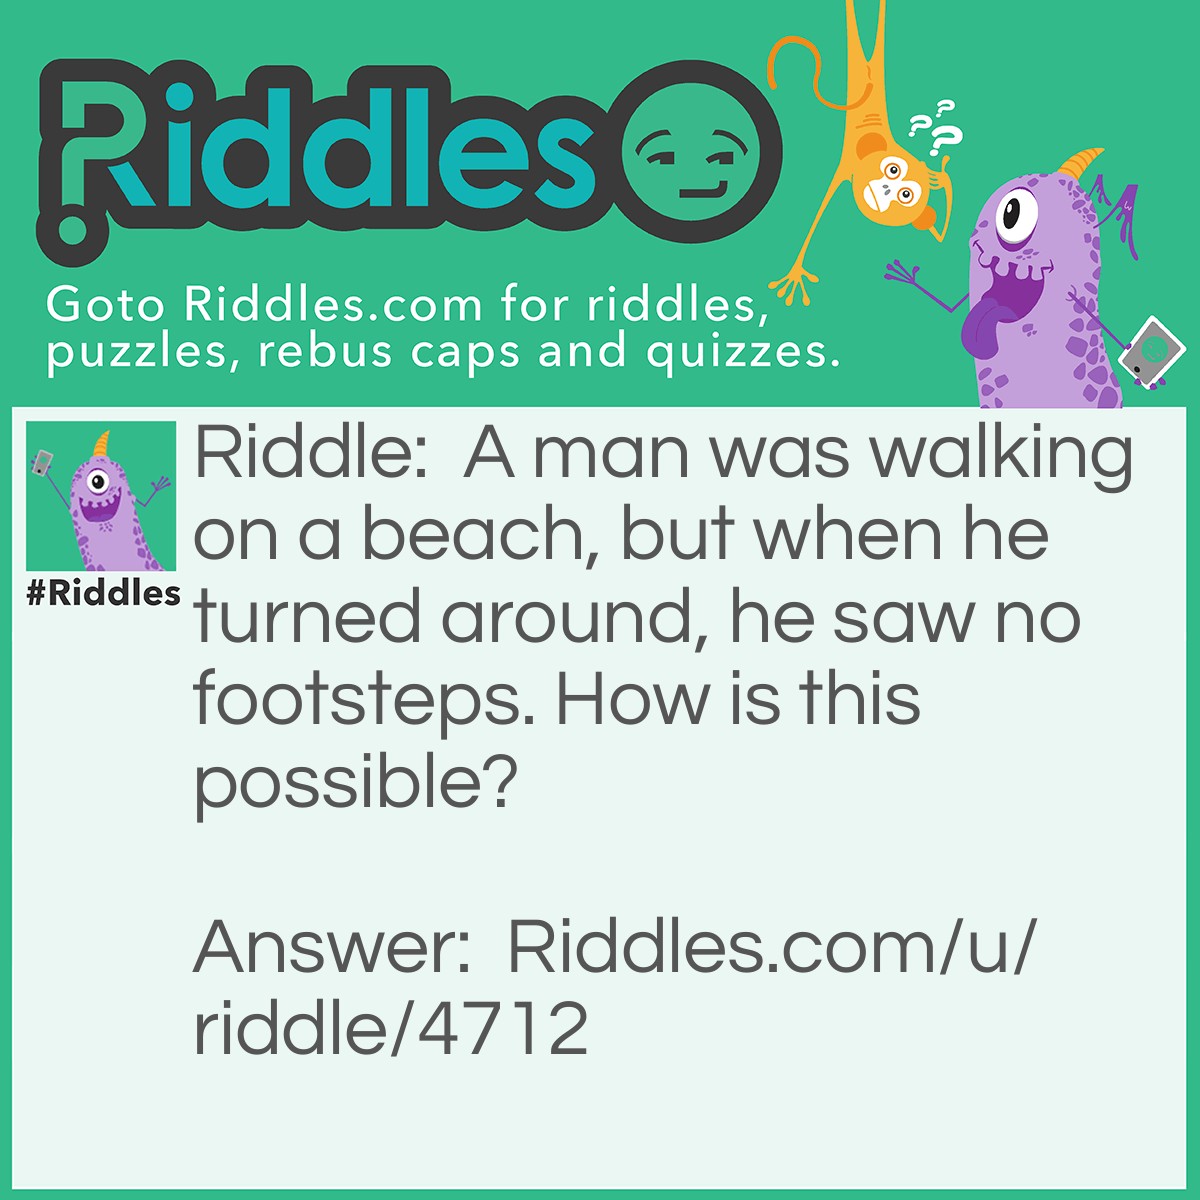 Riddle: A man was walking on a beach, but when he turned around, he saw no footsteps. How is this possible? Answer: He was walking backwards.